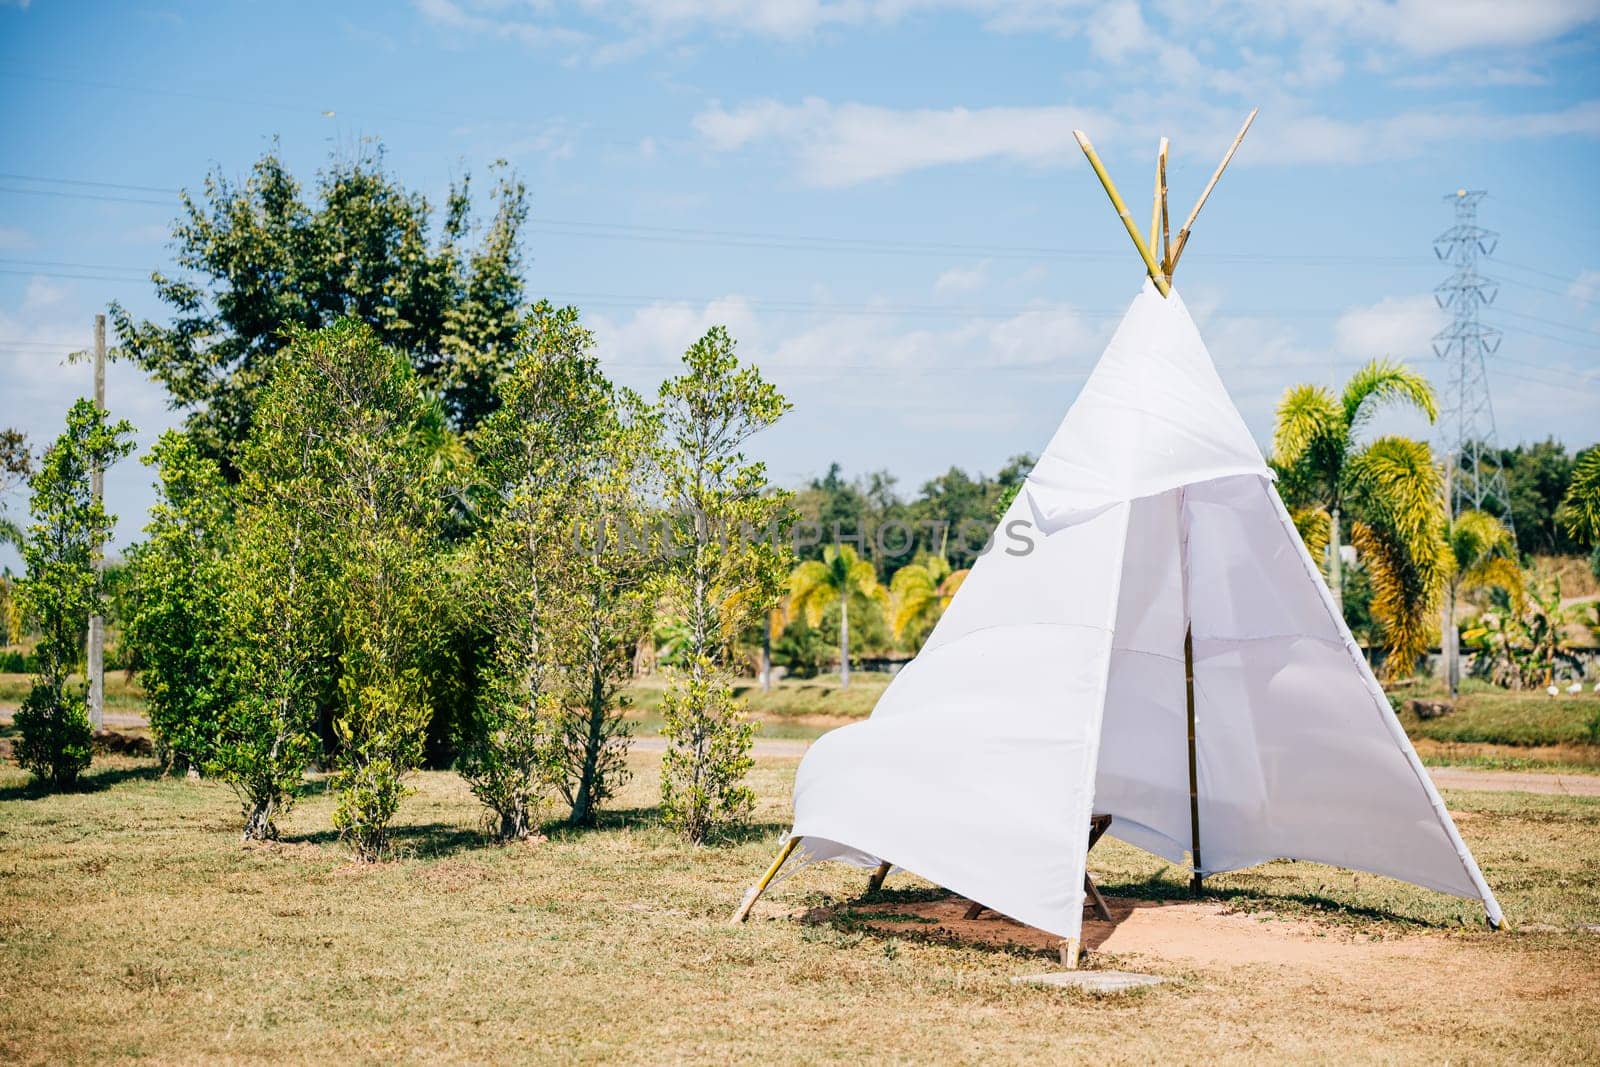 A charming summer wedding teepee stands in a green field evoking joy and celebration by Sorapop